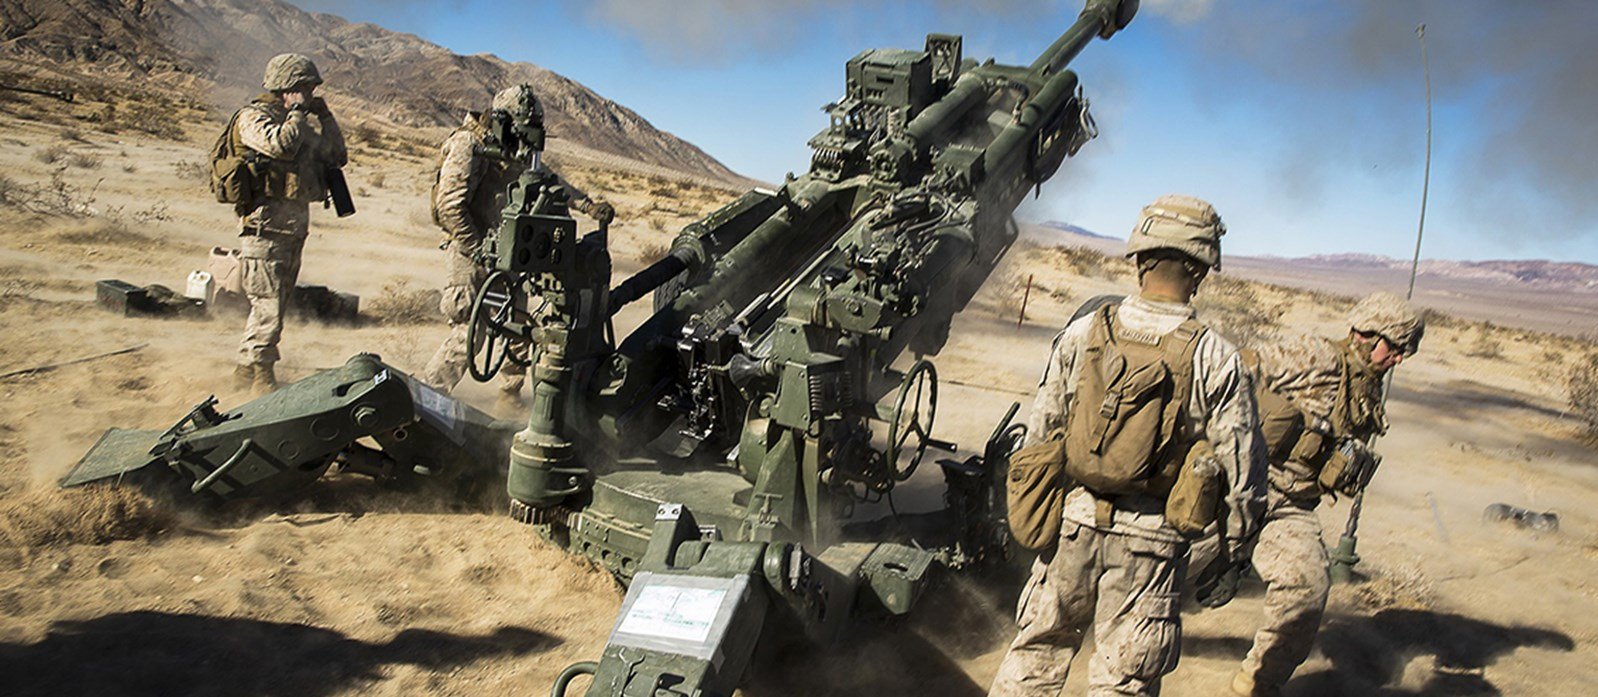 Leonardo DRS Receives Contract to Digitize Army Howitzer Fire Control Systems